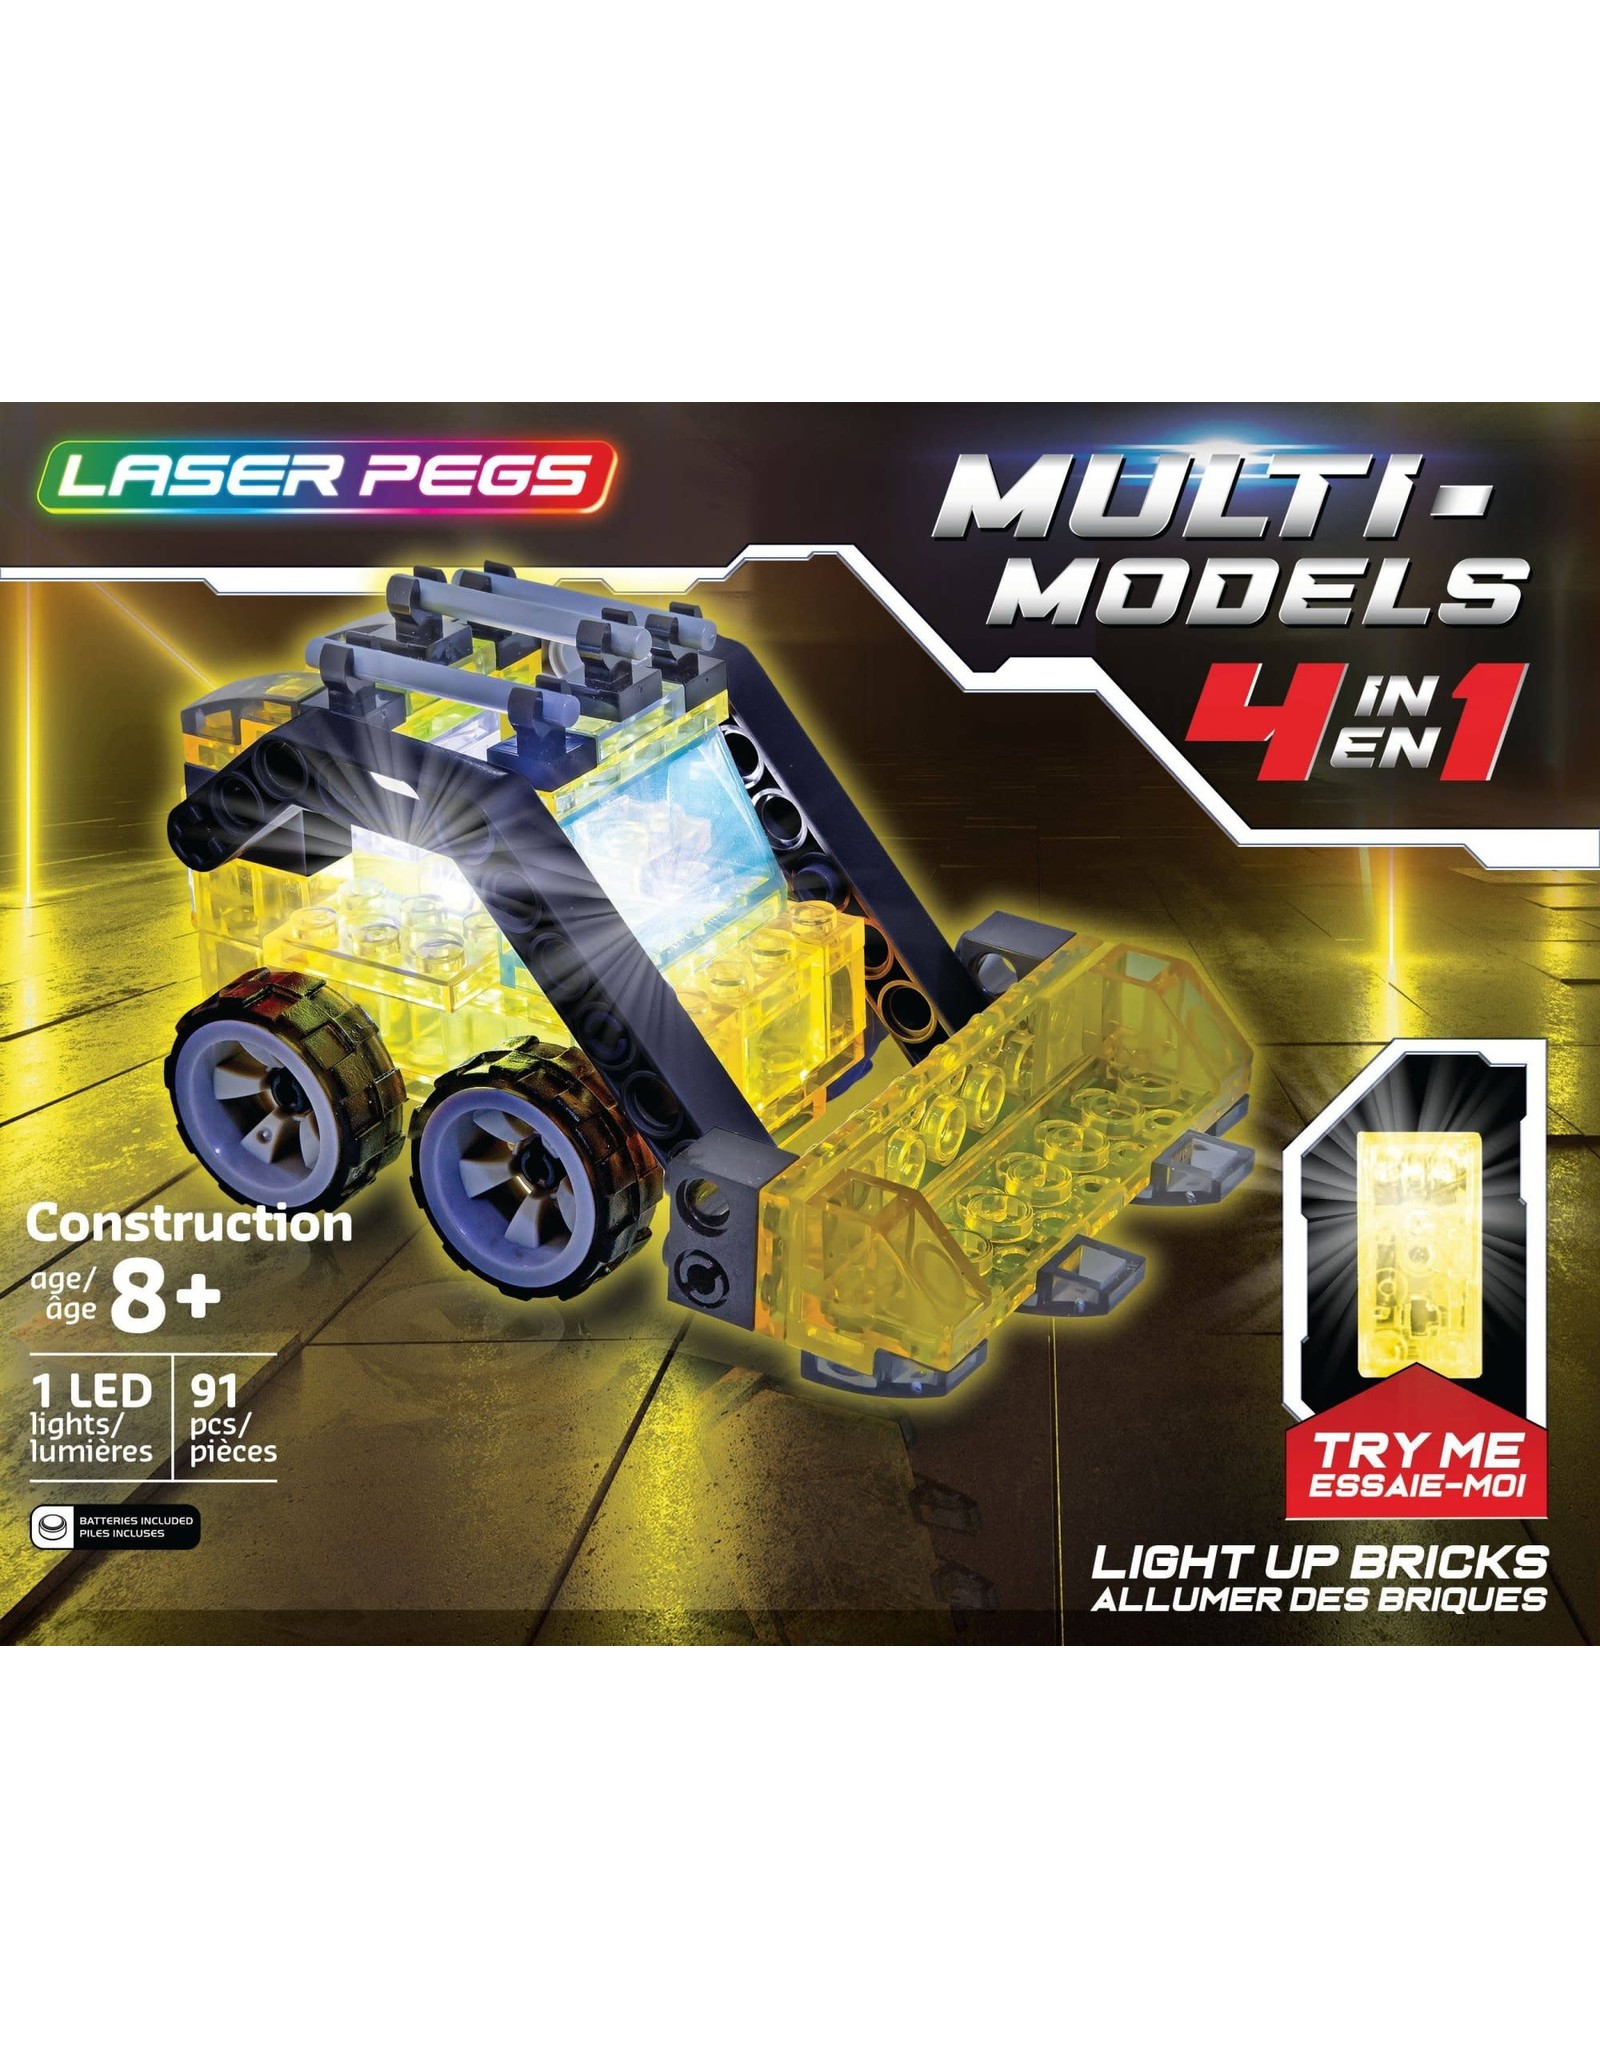 Laser Pegs 4 in 1 Mini Construction